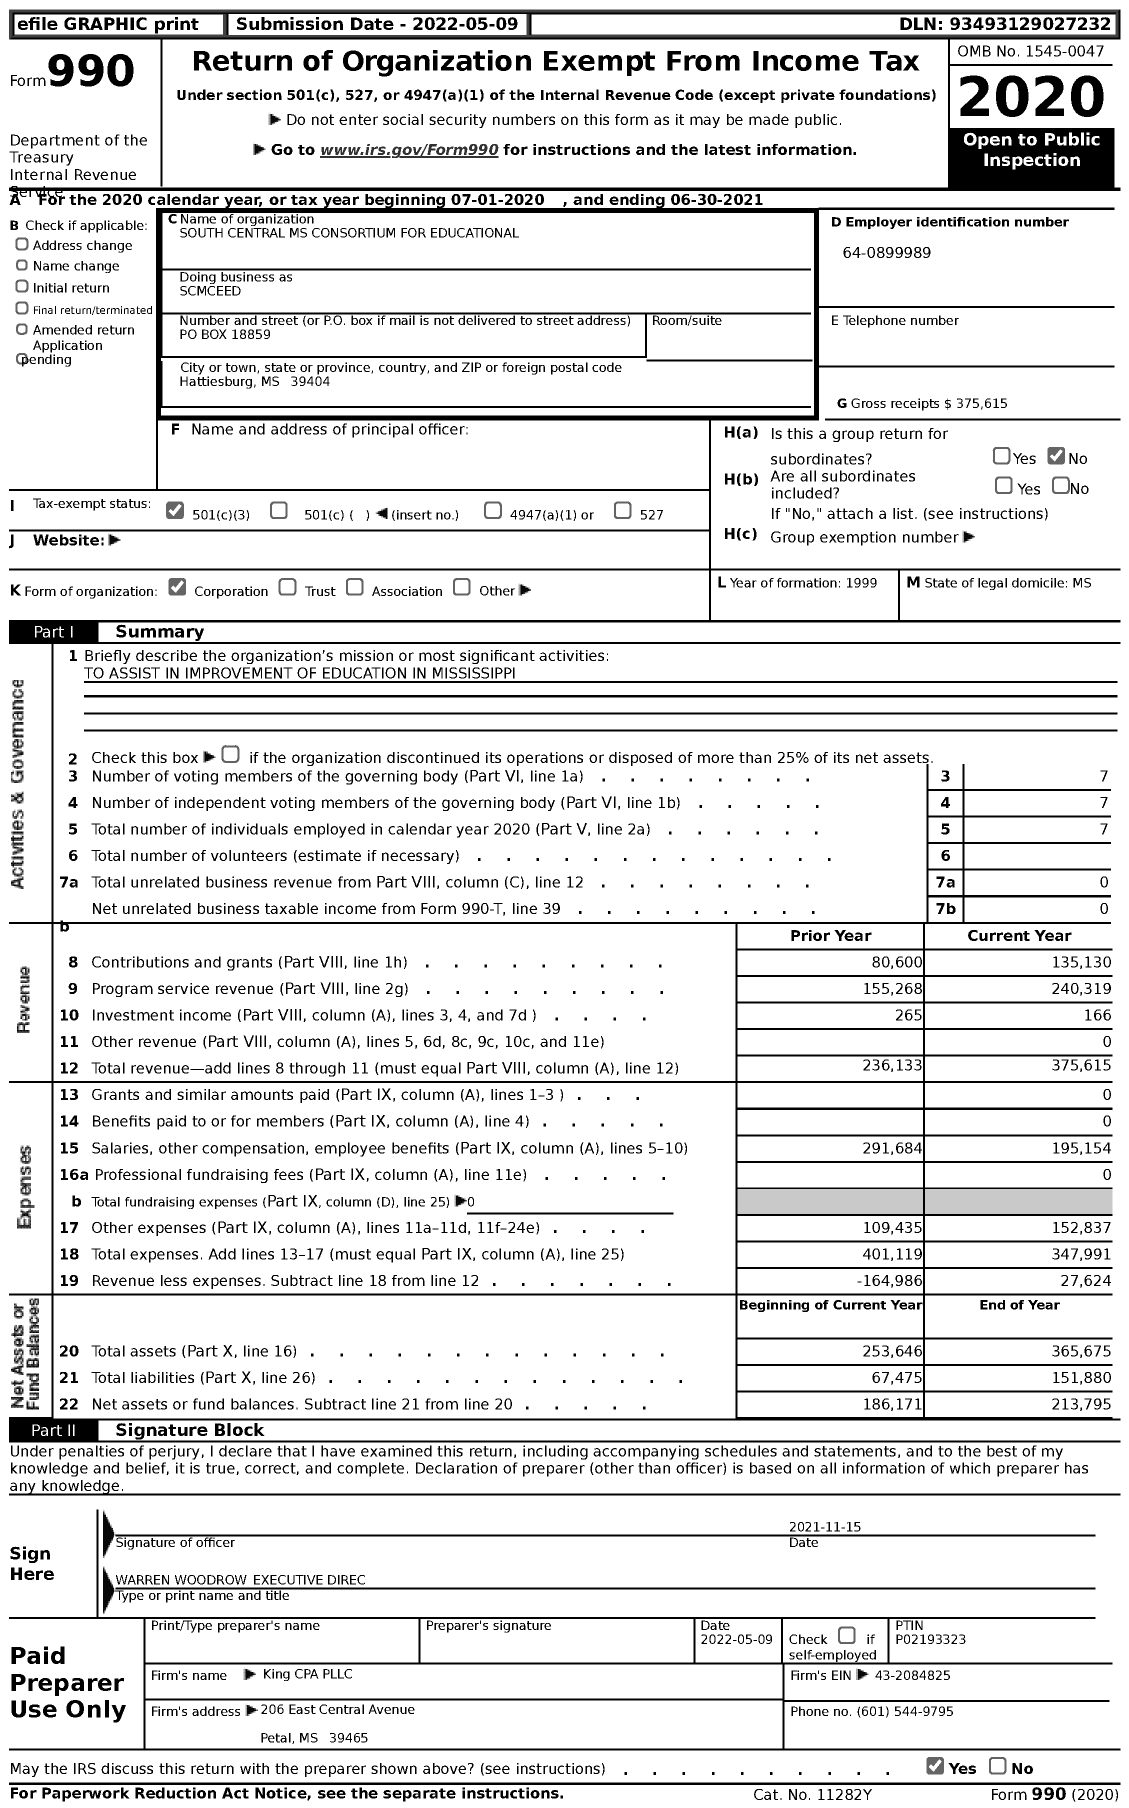 Image of first page of 2020 Form 990 for South Central Mississippi Cons for Educational Excellence and DVLPMT (SCMCEED)